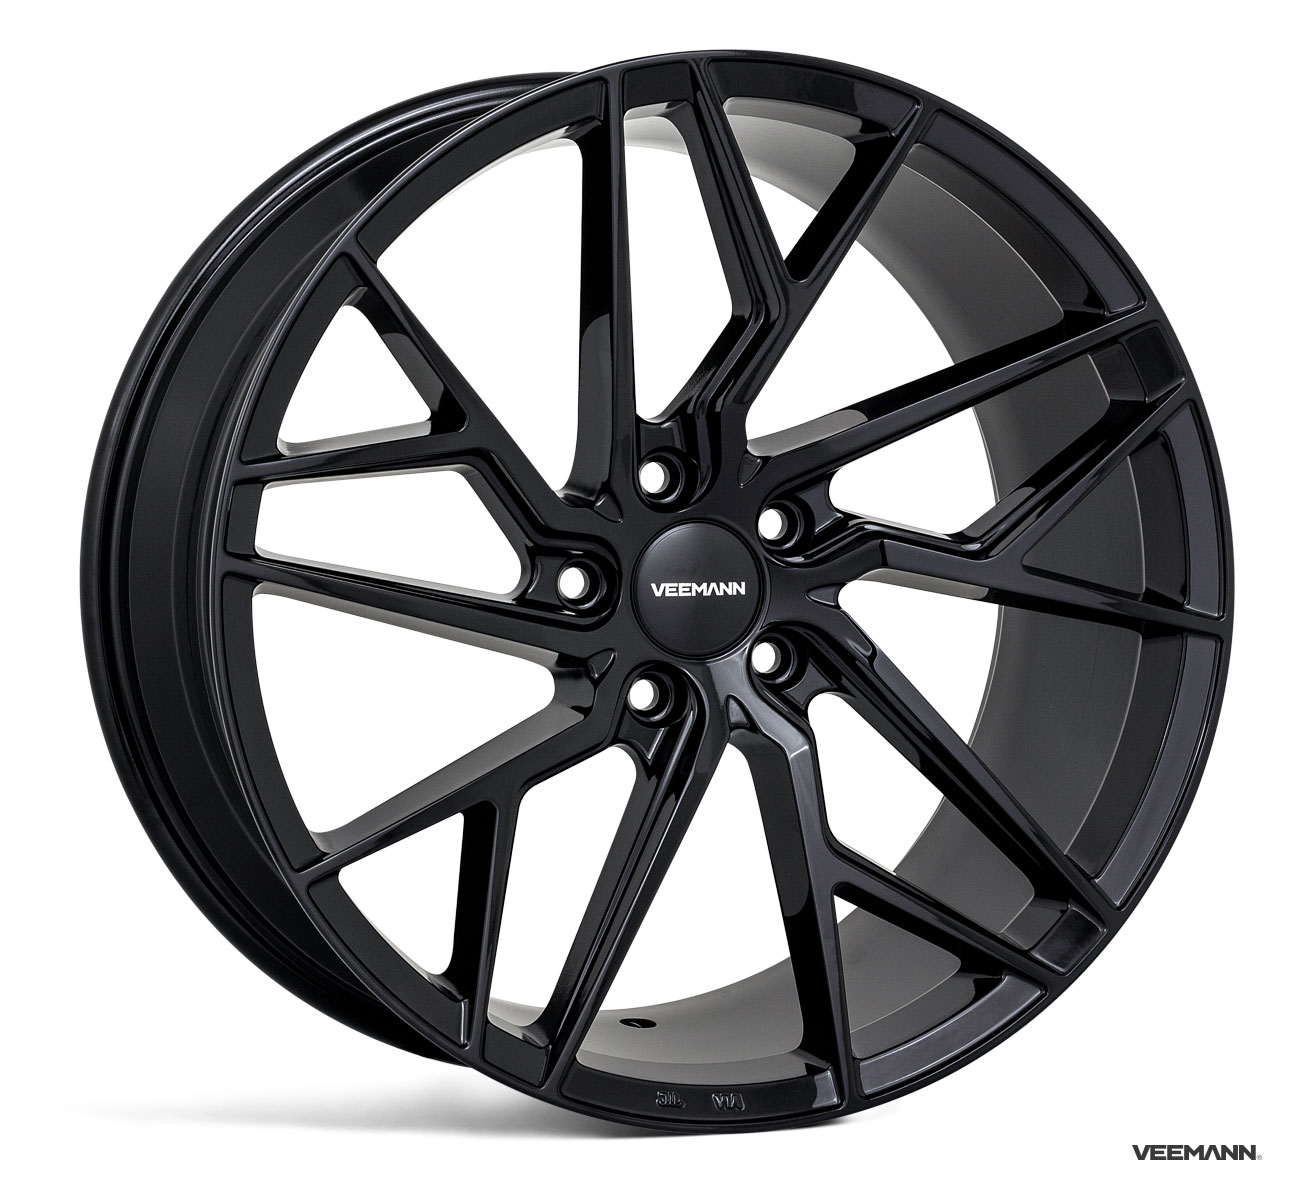 NEW 19" VEEMANN V-FS44 ALLOY WHEELS IN GLOSS BLACK WITH WIDER 9.5" REARS